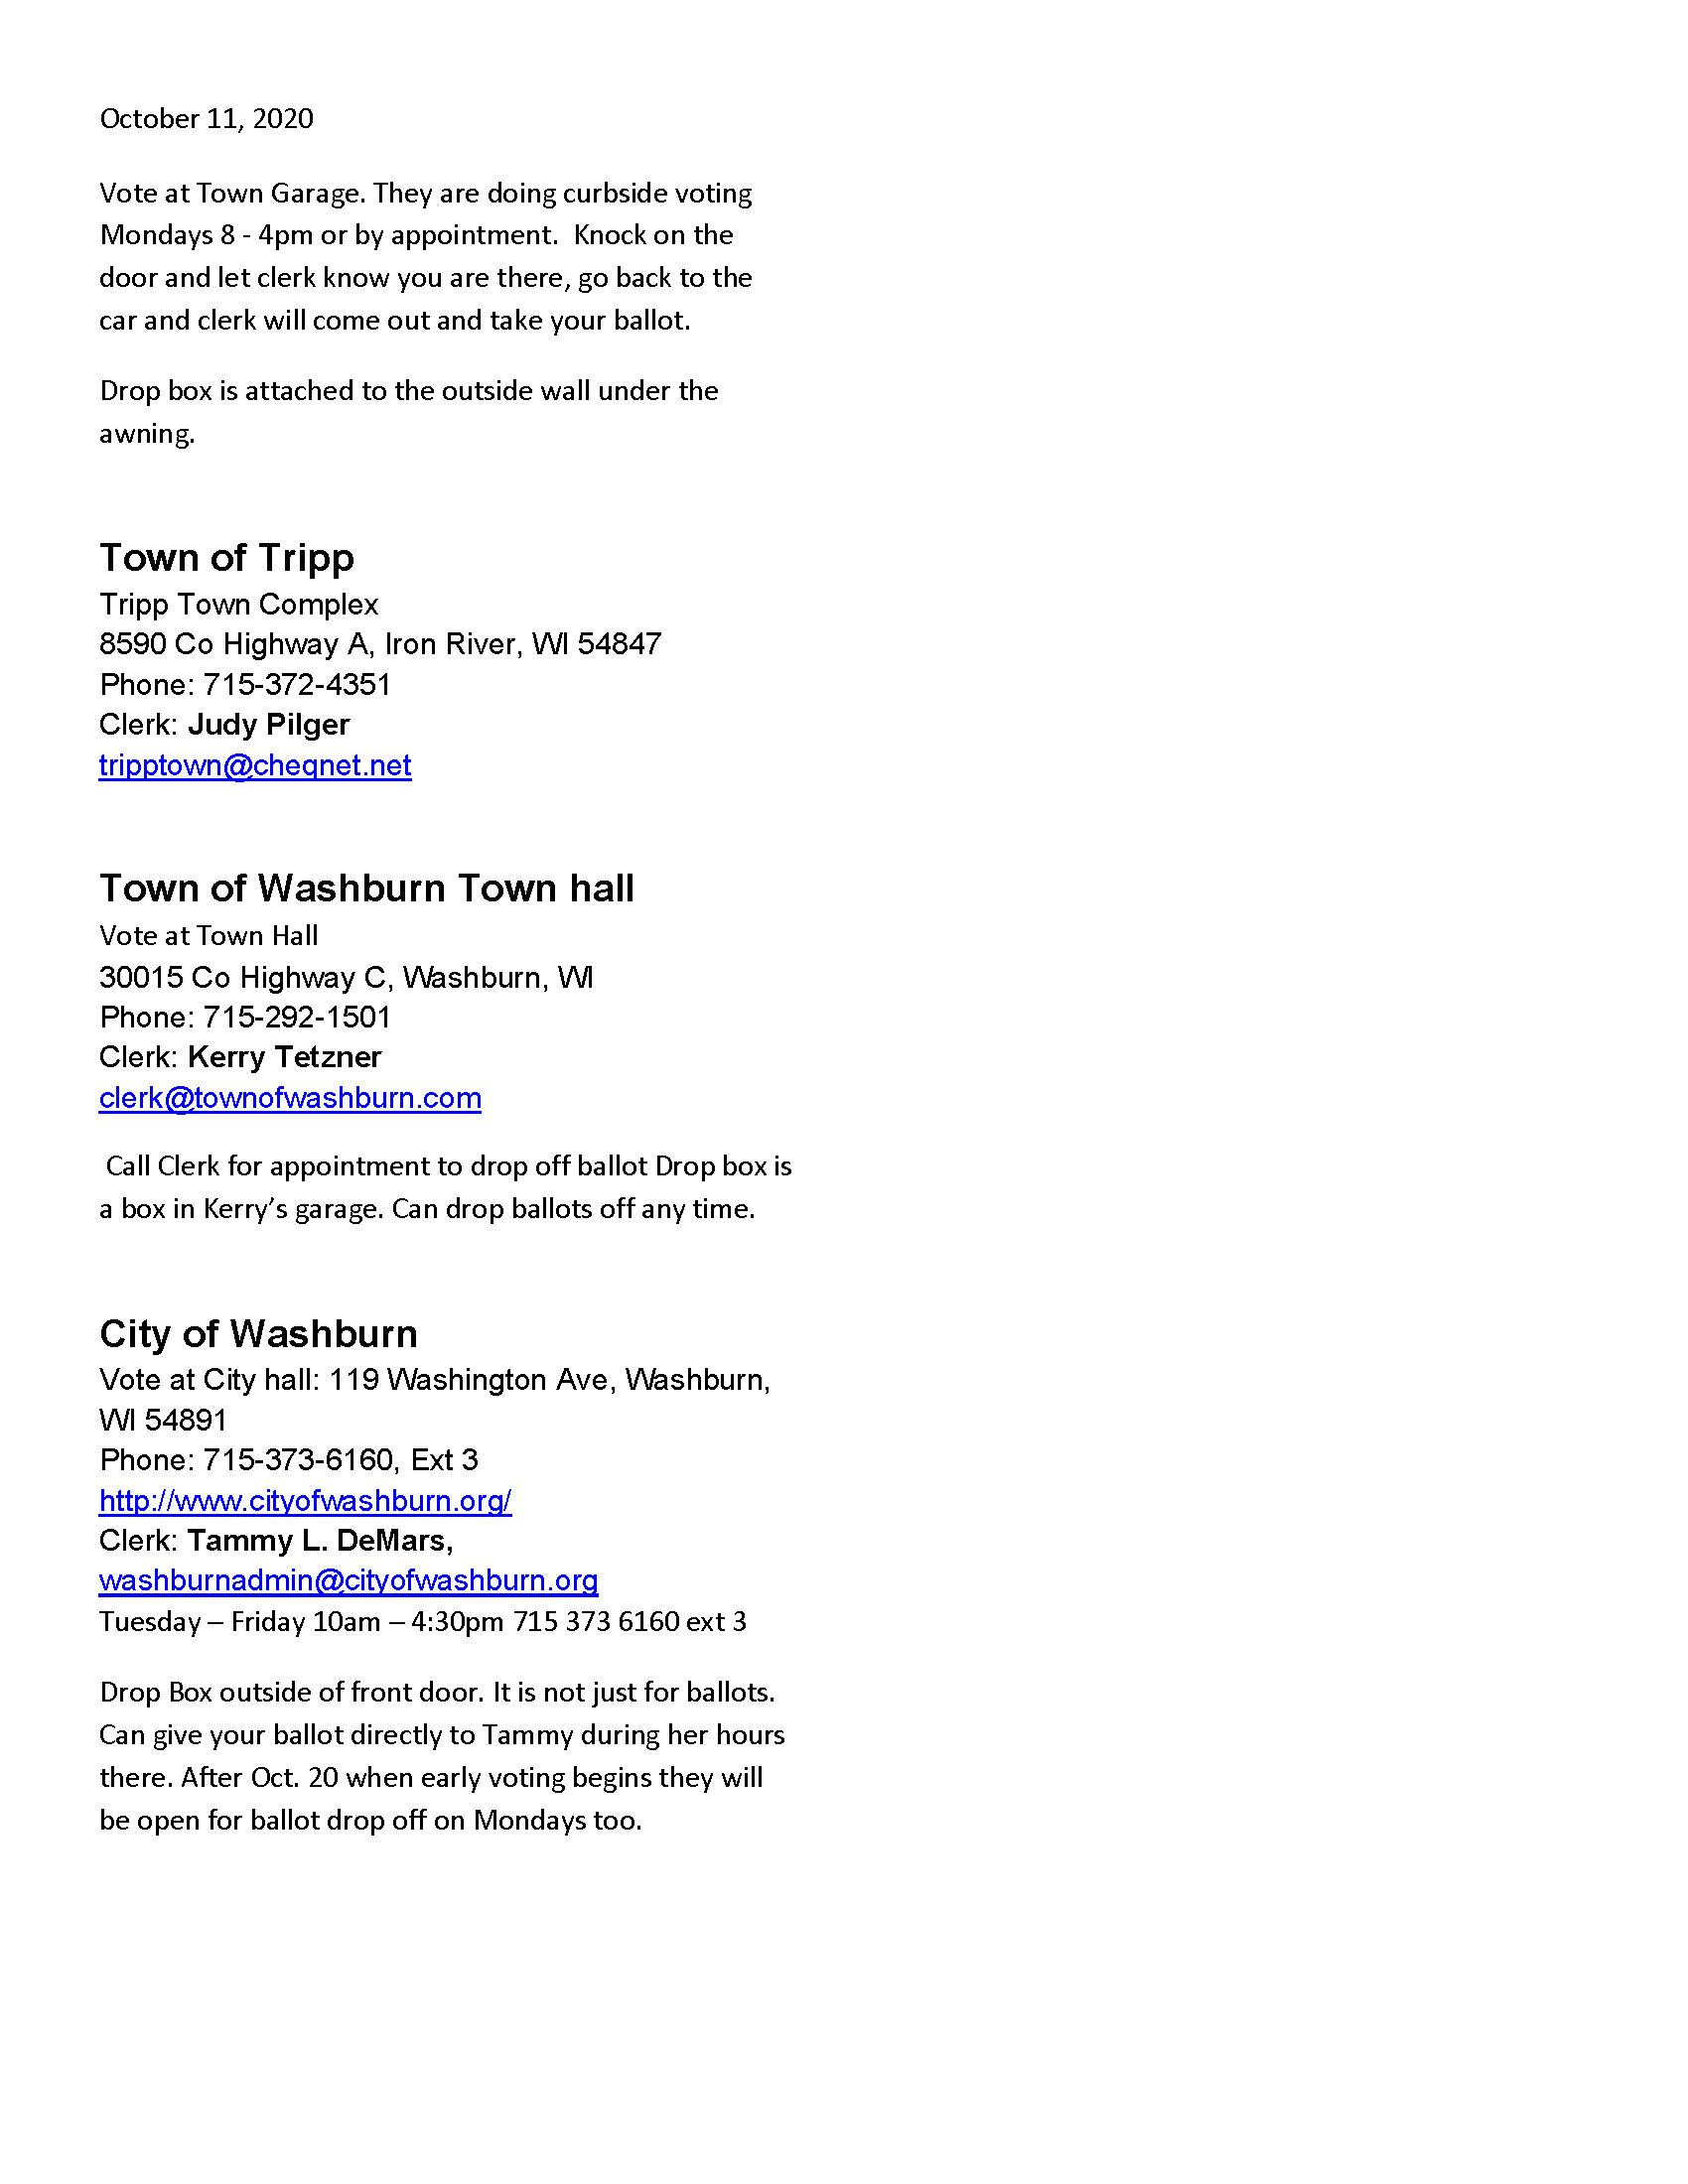 Bayfield County Municipalities Dropbox locations and Voting prior to Election_Page_4.jpg